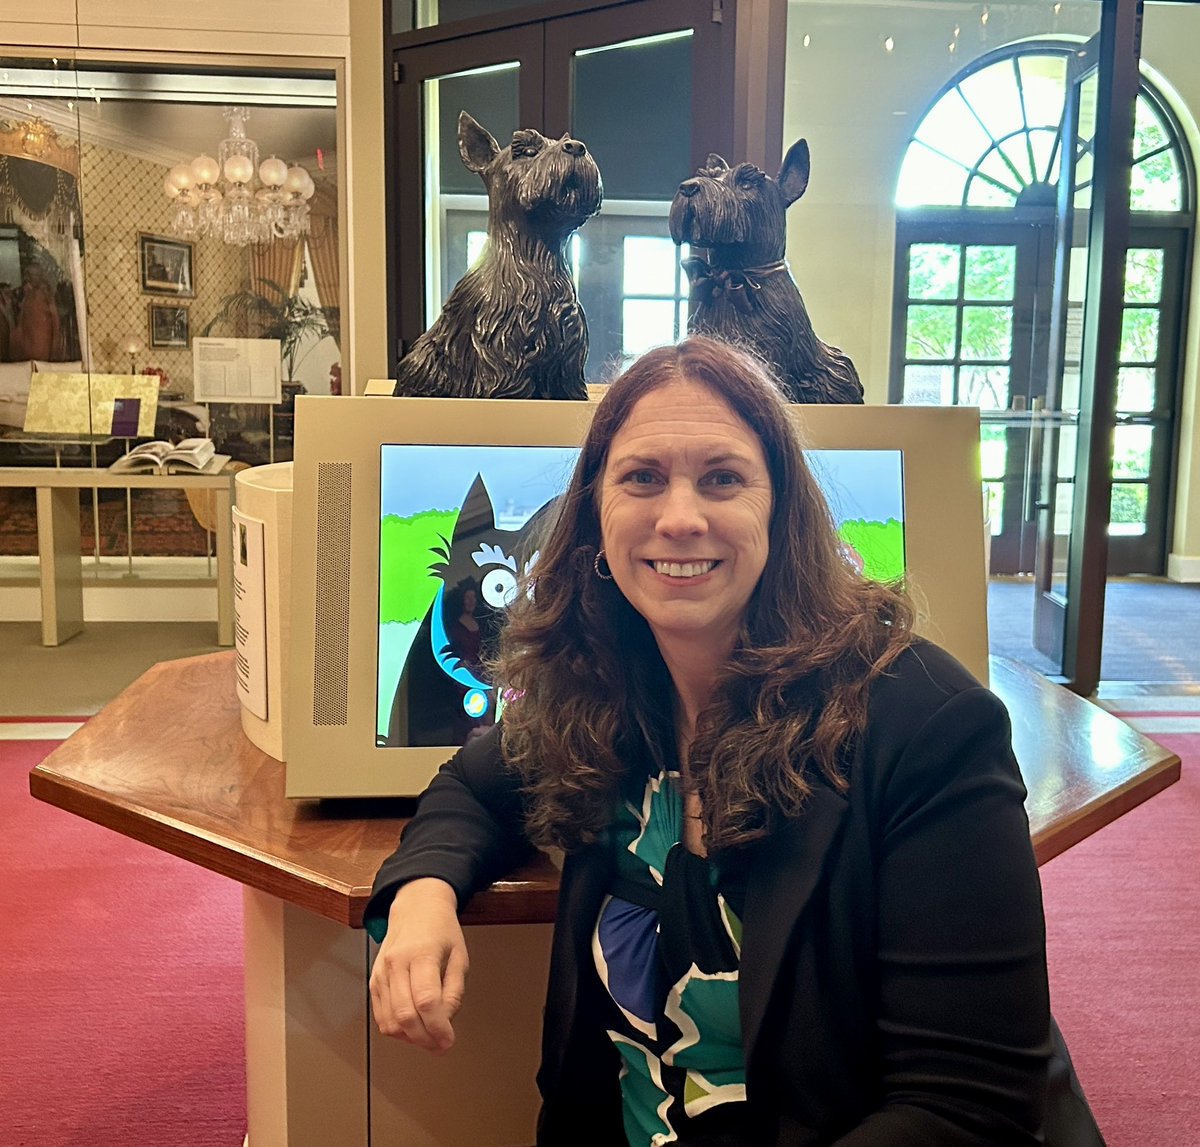 What an insightful day @GWBLibrary in Dallas. I met with @USNatArchives staff, toured the facility, and viewed historic records & artifacts from the Bush43 presidency. I will be back! Keep up the great work.